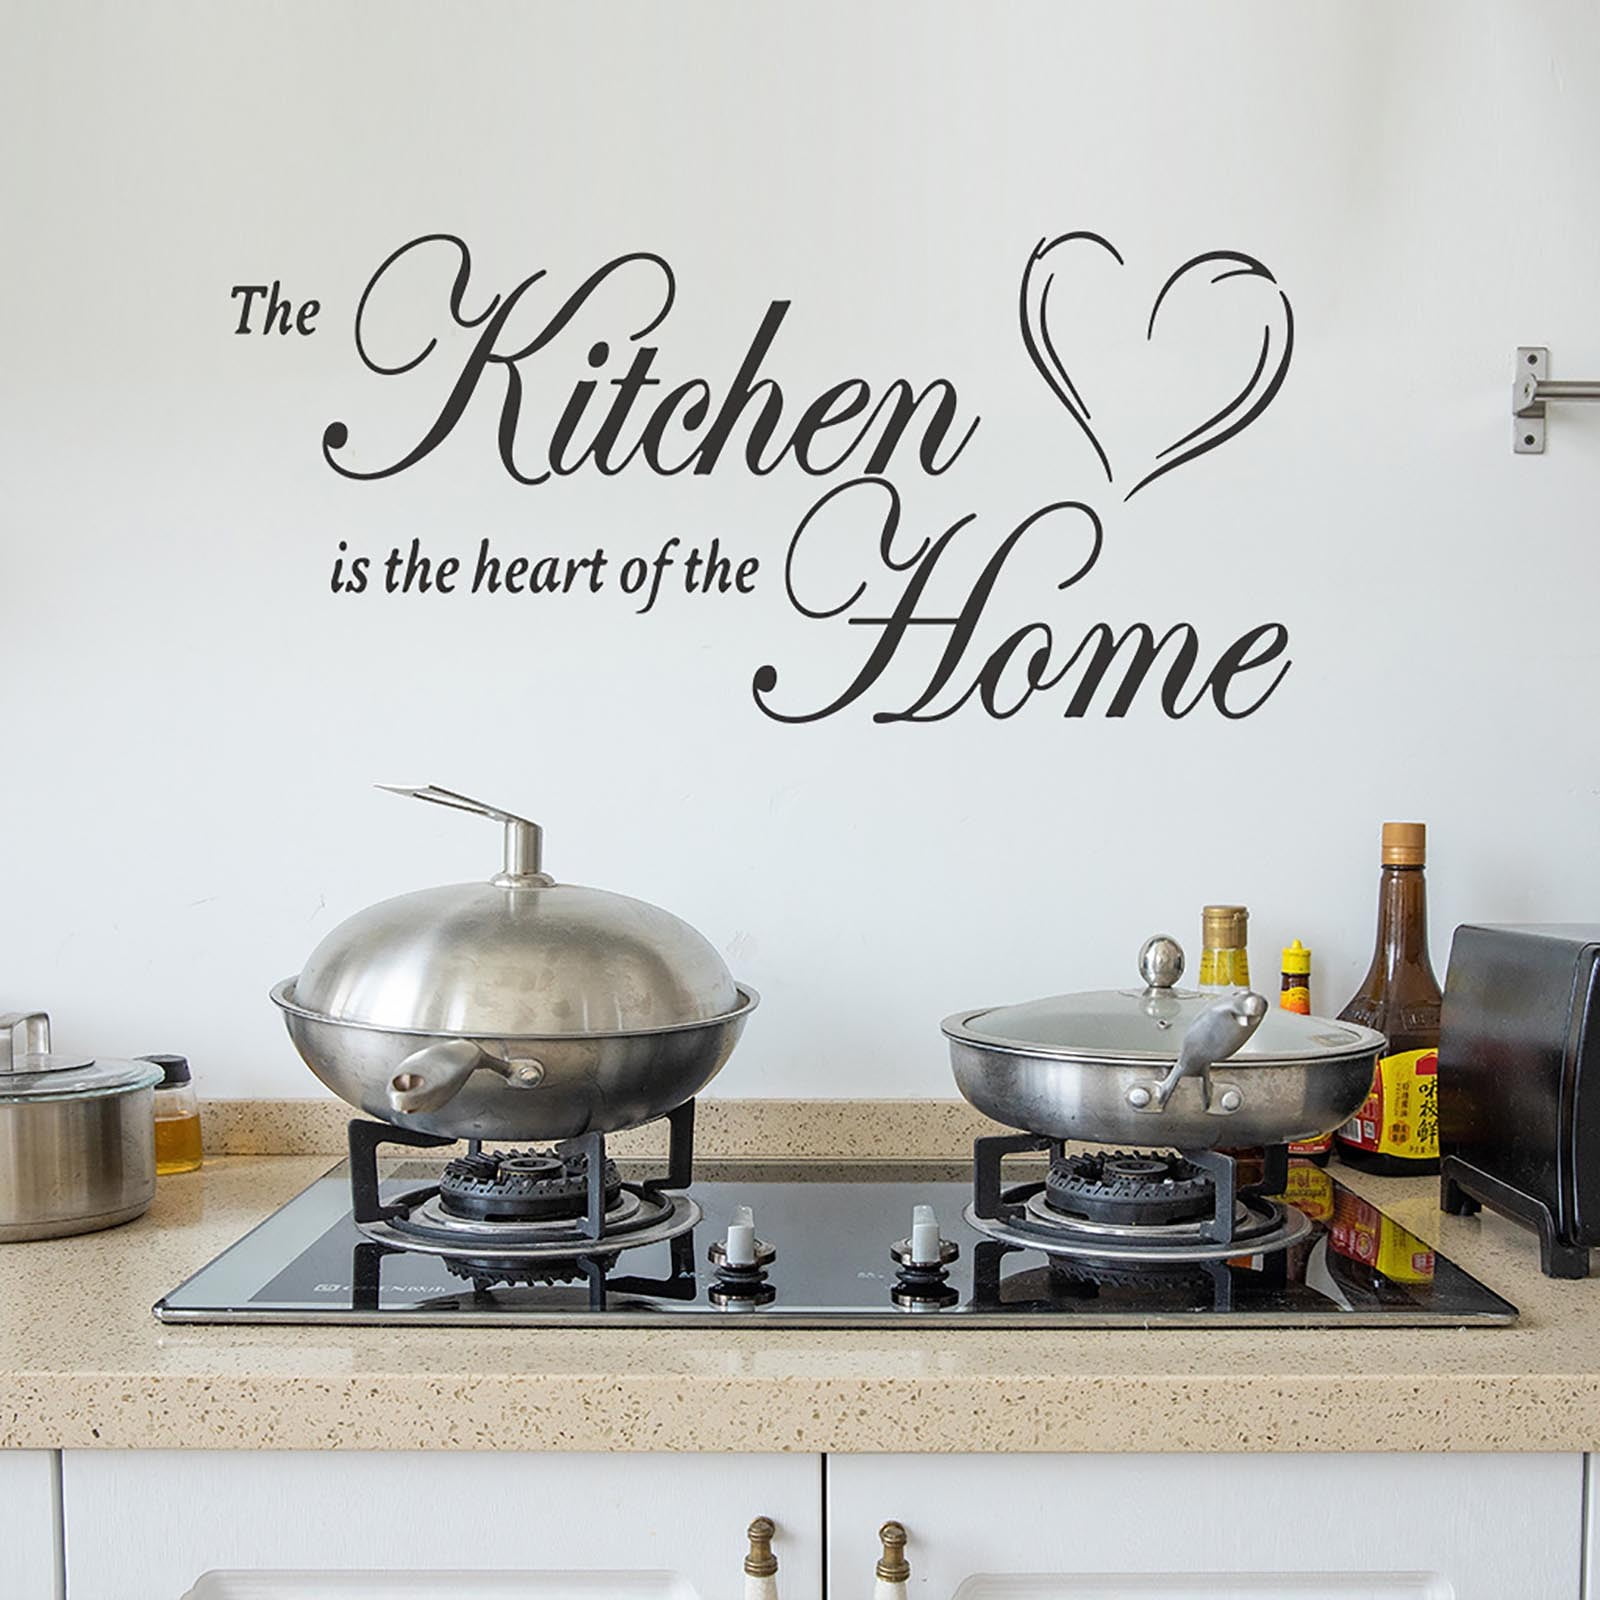 Kitchen Heart Home Wall Sticker Art Dining Room Removable DIY N6B1 I4F4